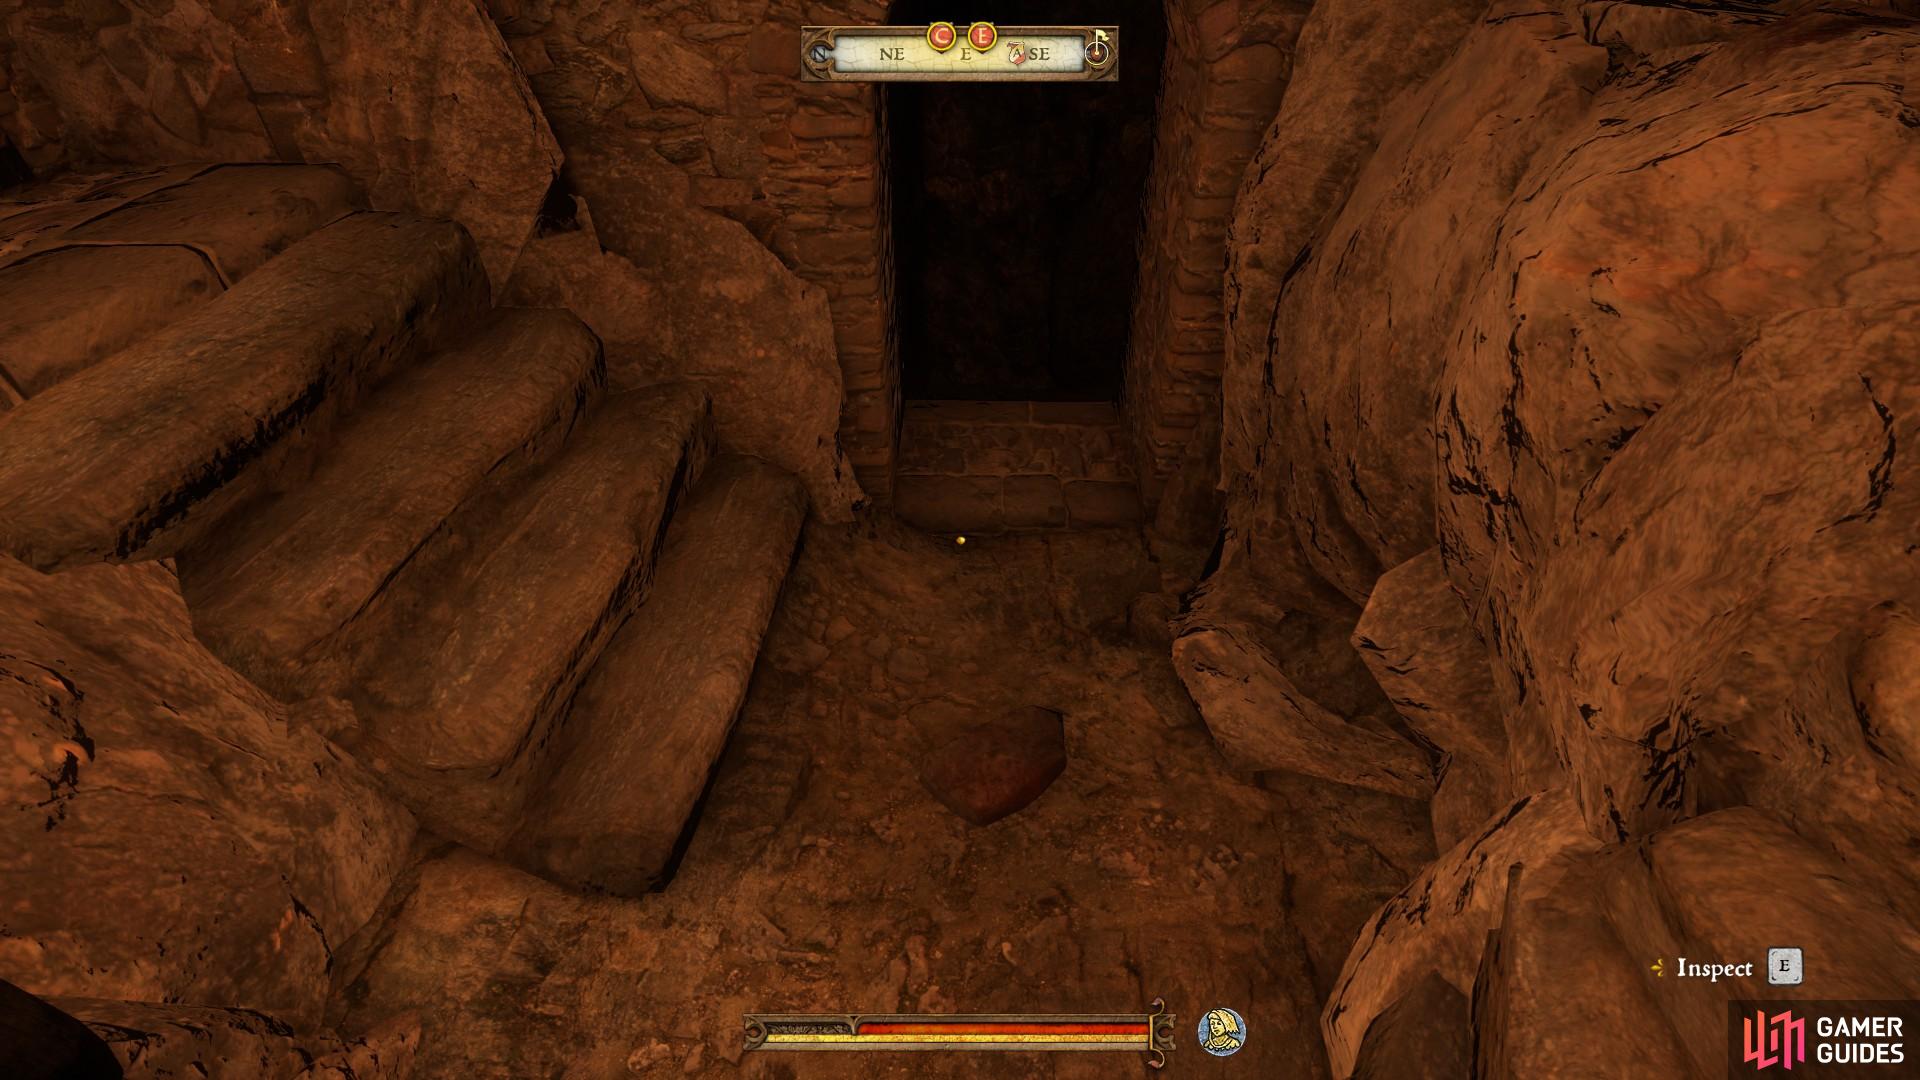 You can find the stone on the floor at the entrance to the catacombs.